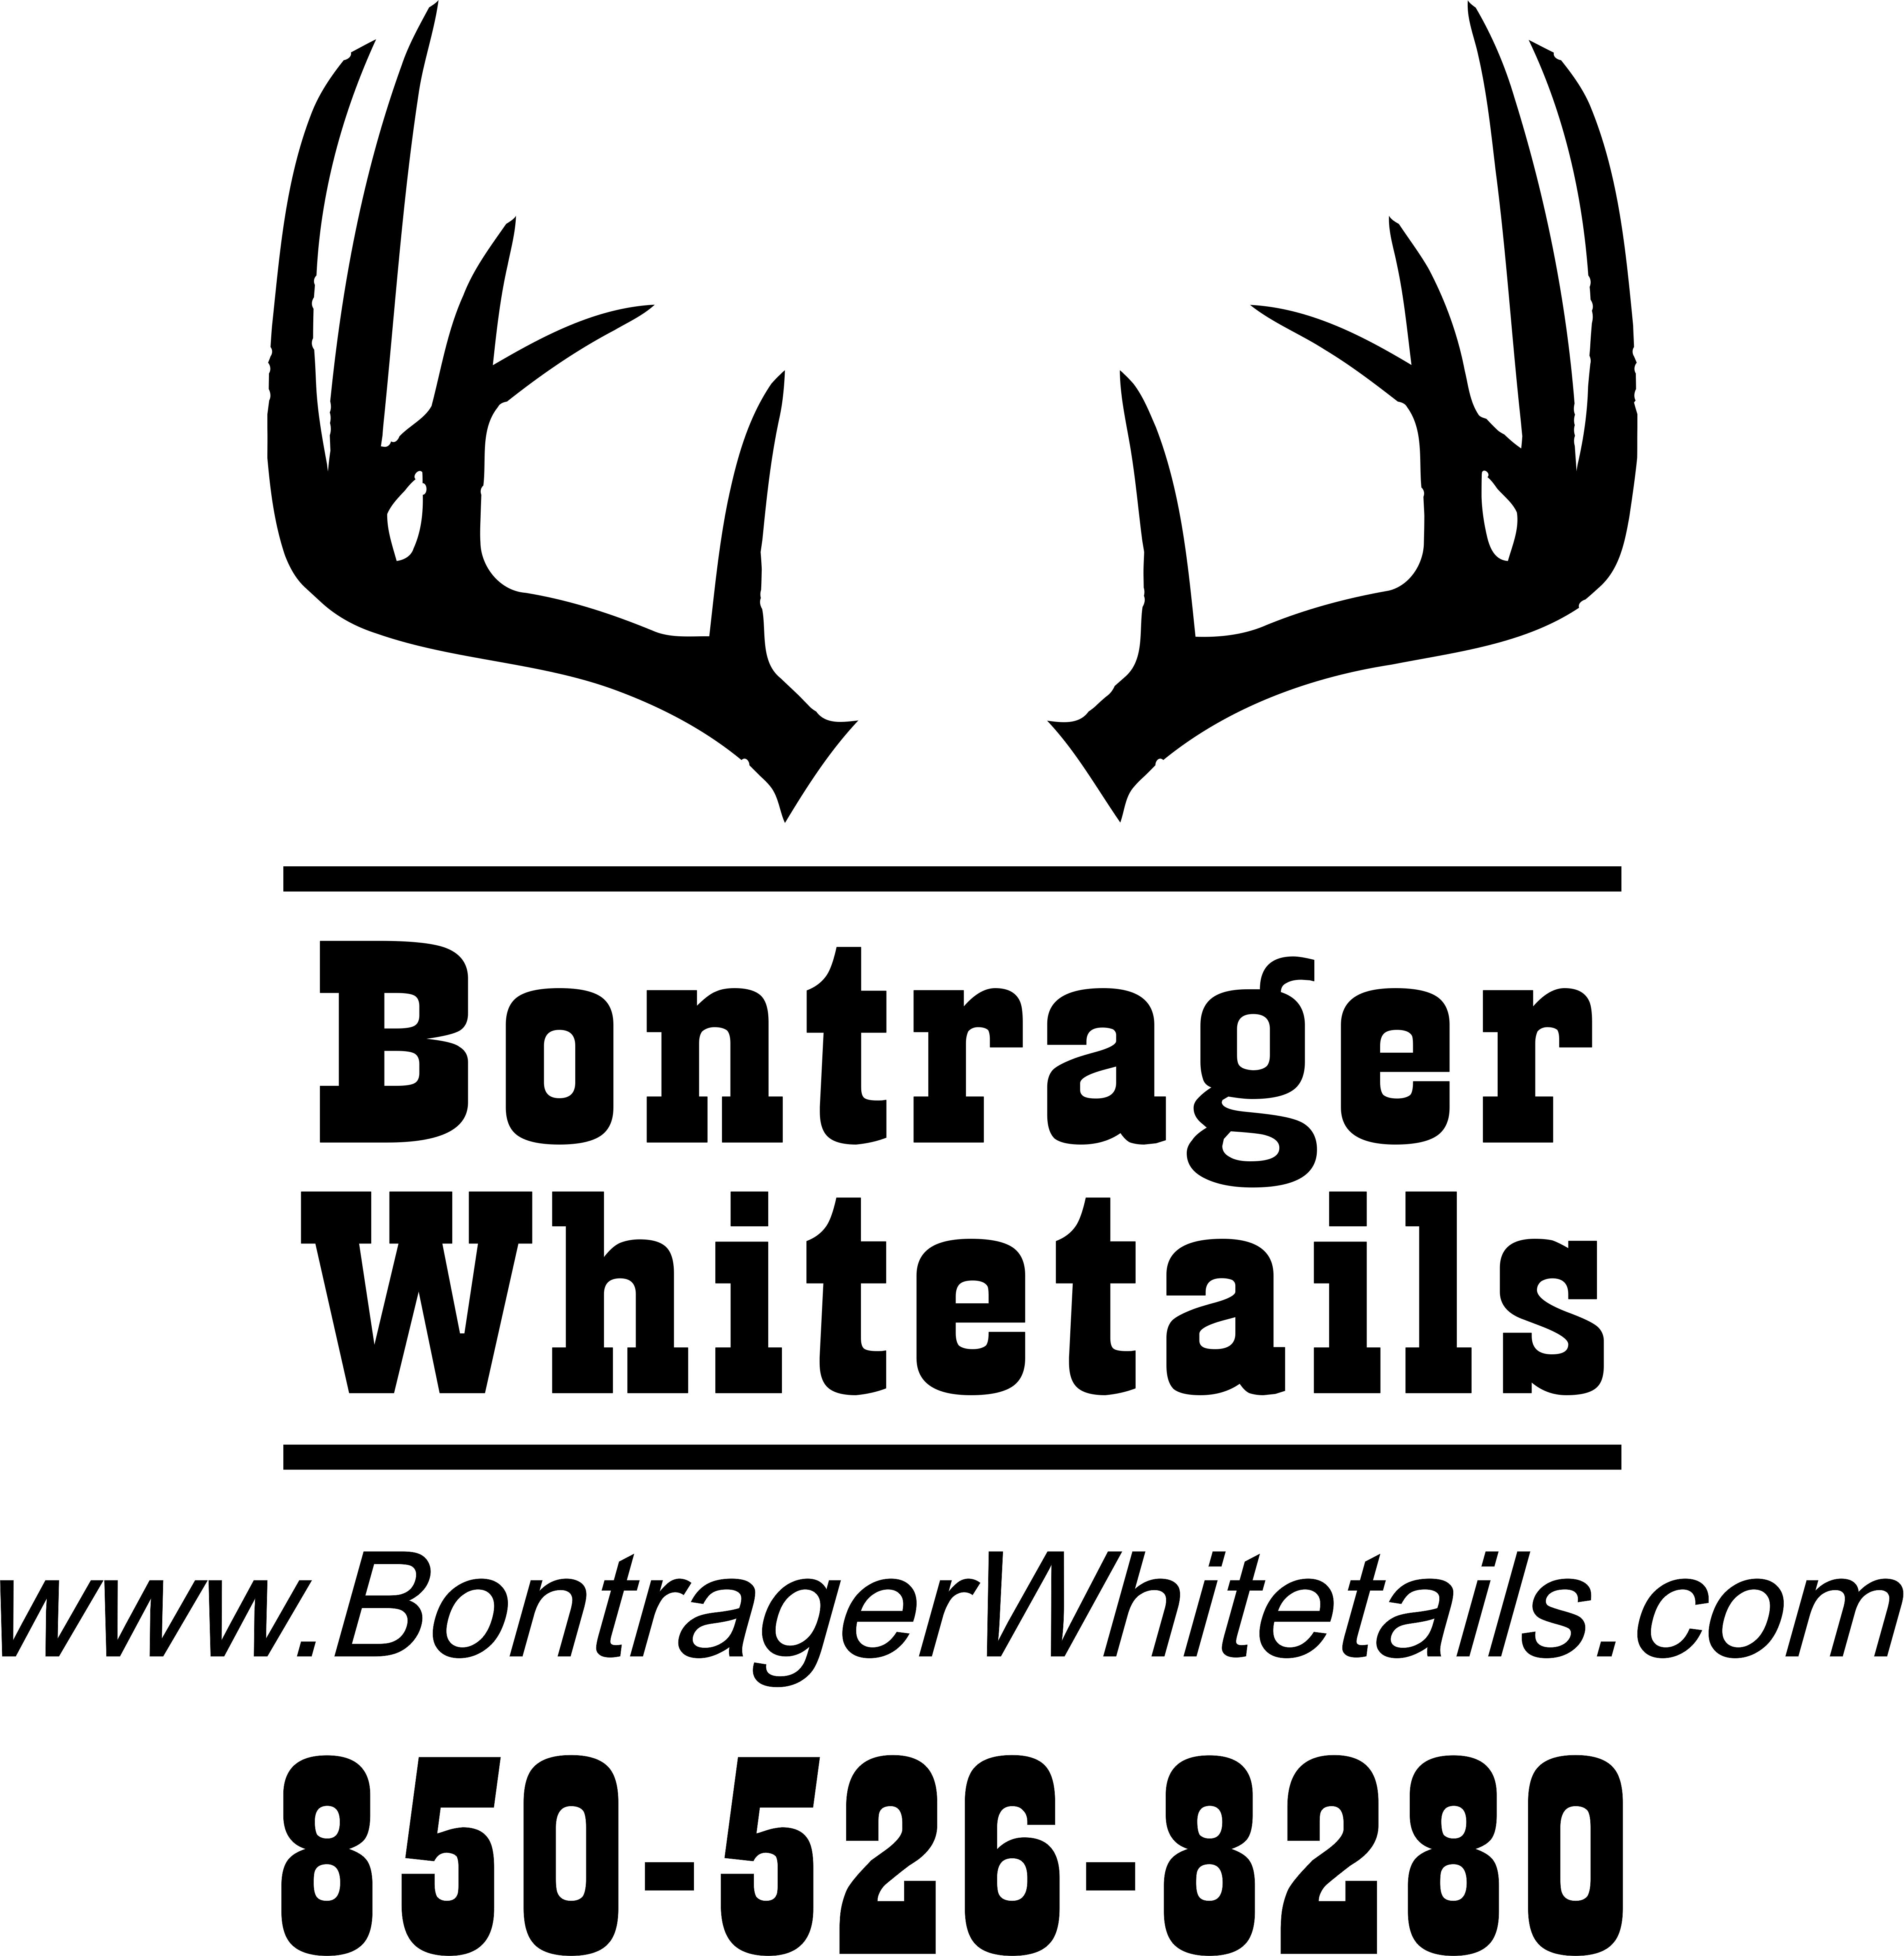 Chesapeake TLL01611B  WHITETAIL BORDER MAKE ME OFFER FOR LOWEST PRICE